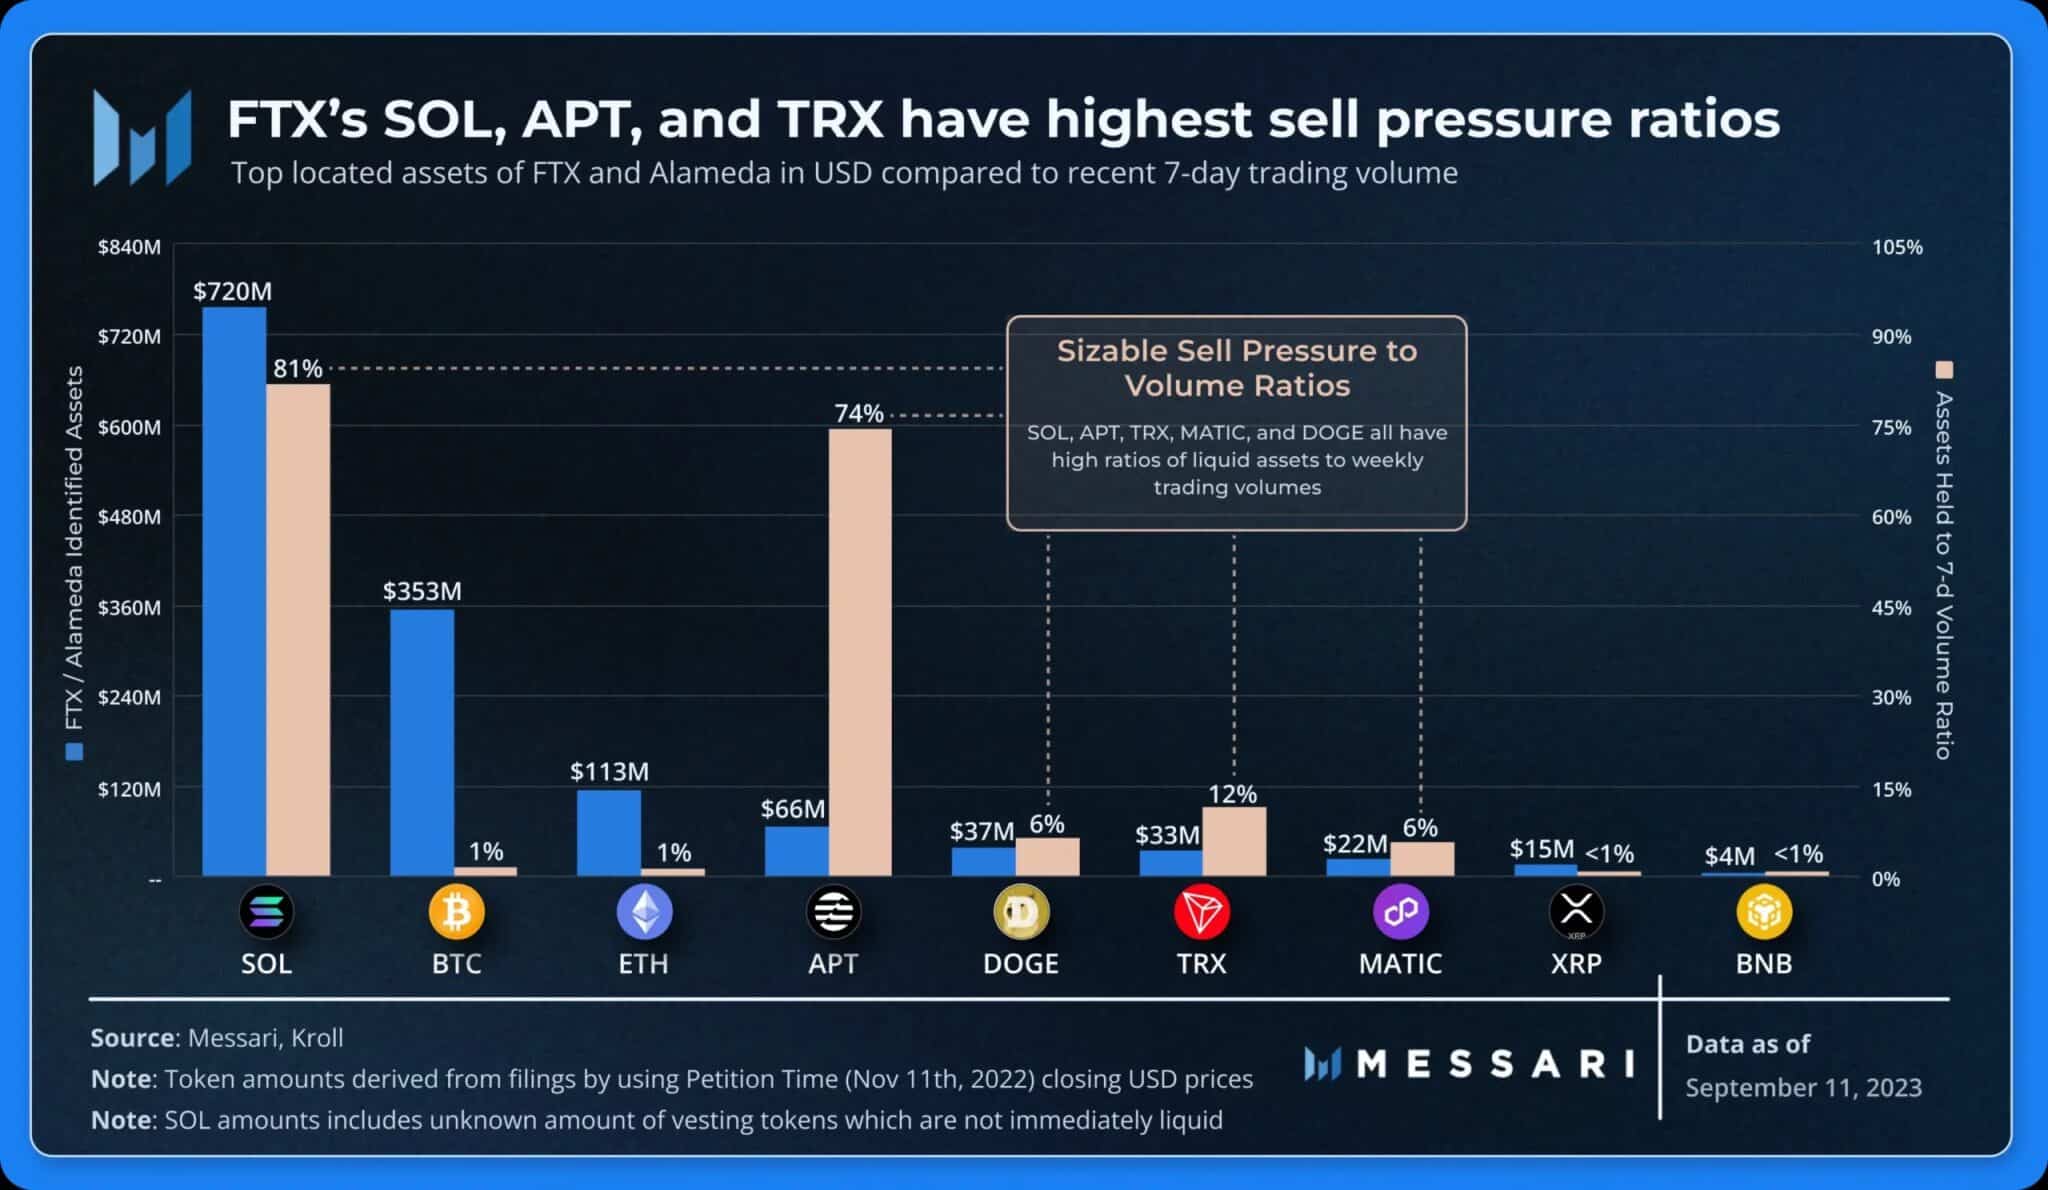 Assets held by FTX (blue) and relative selling pressure compared to 7-day trading volume (beige)